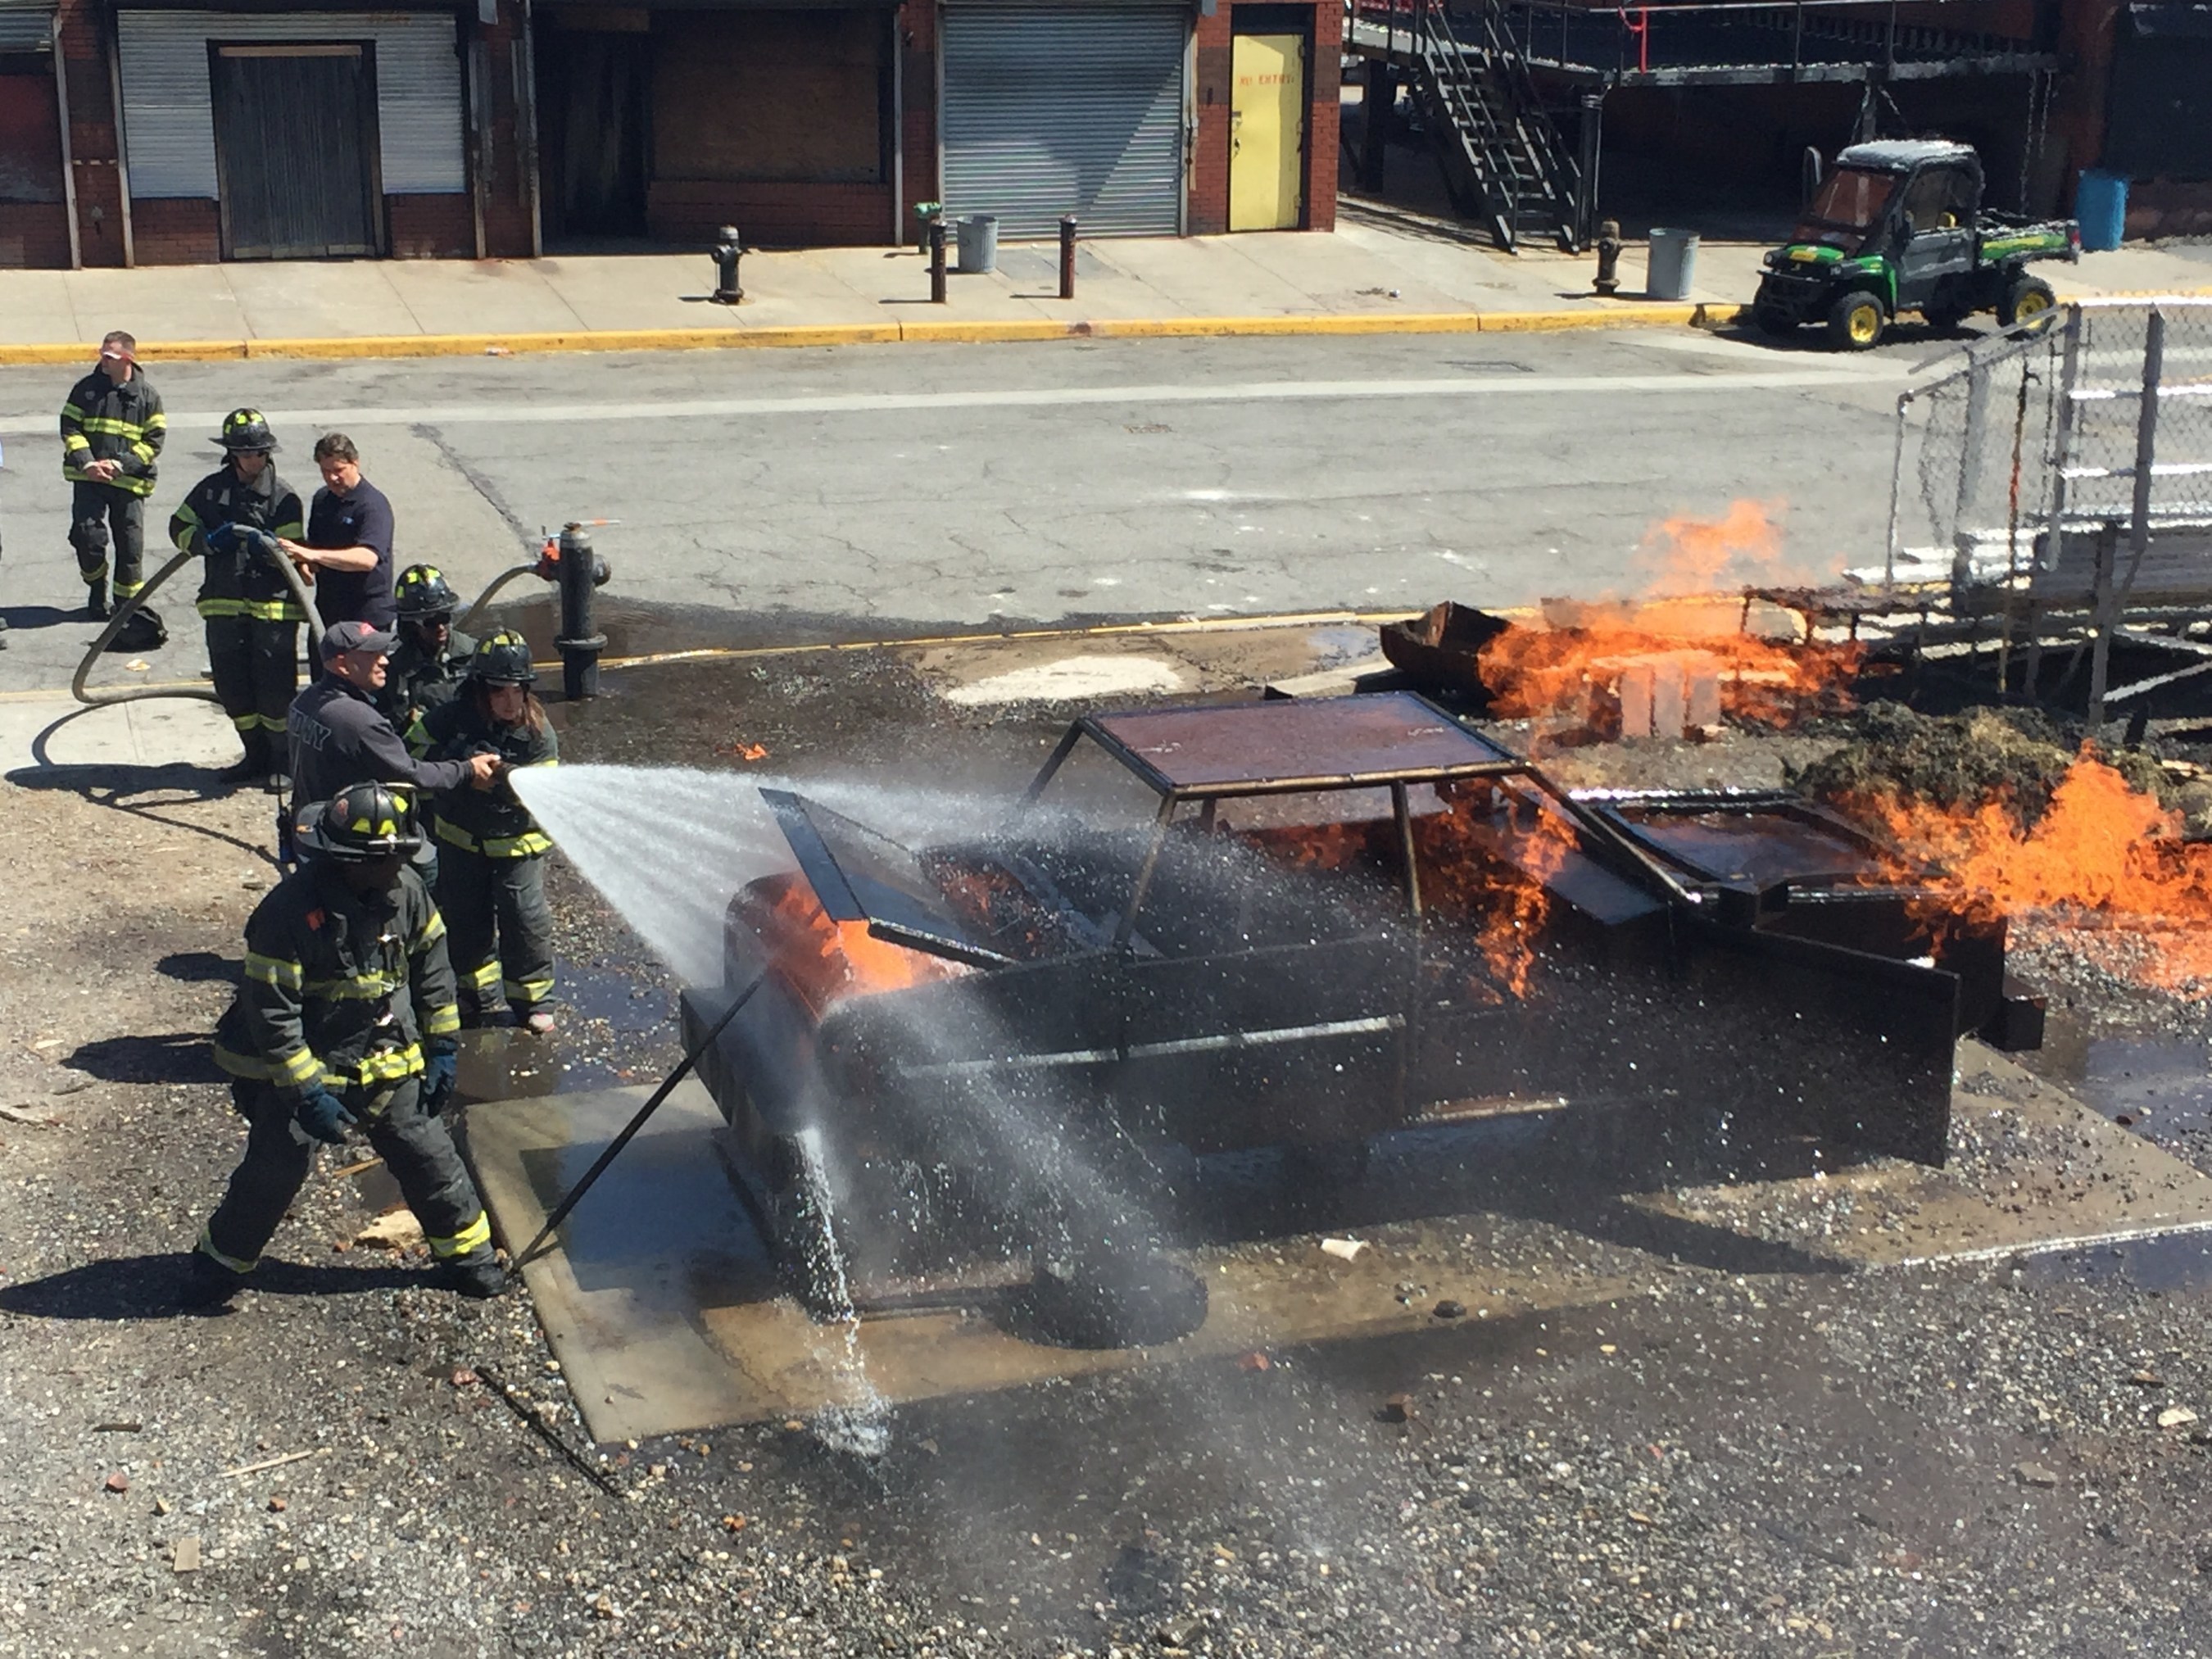 Teaching scenarios for wounded veterans included a simulated vehicle fire.